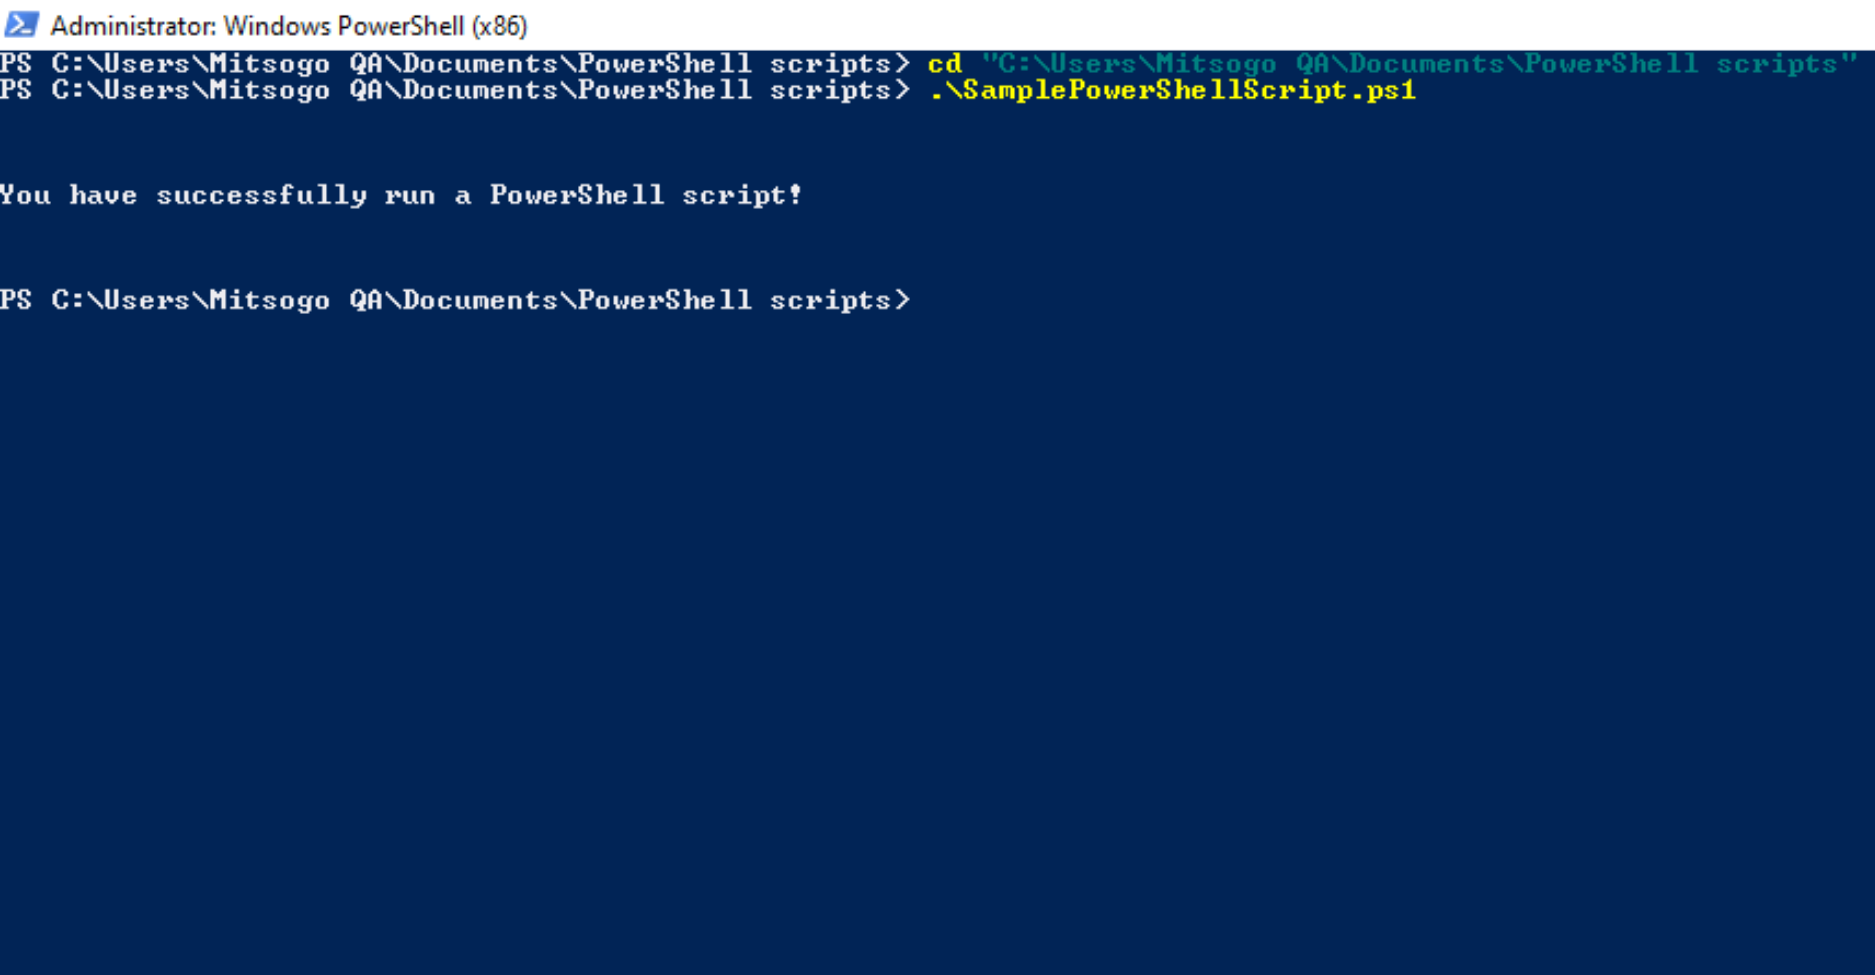 Calling a script from PowerShell